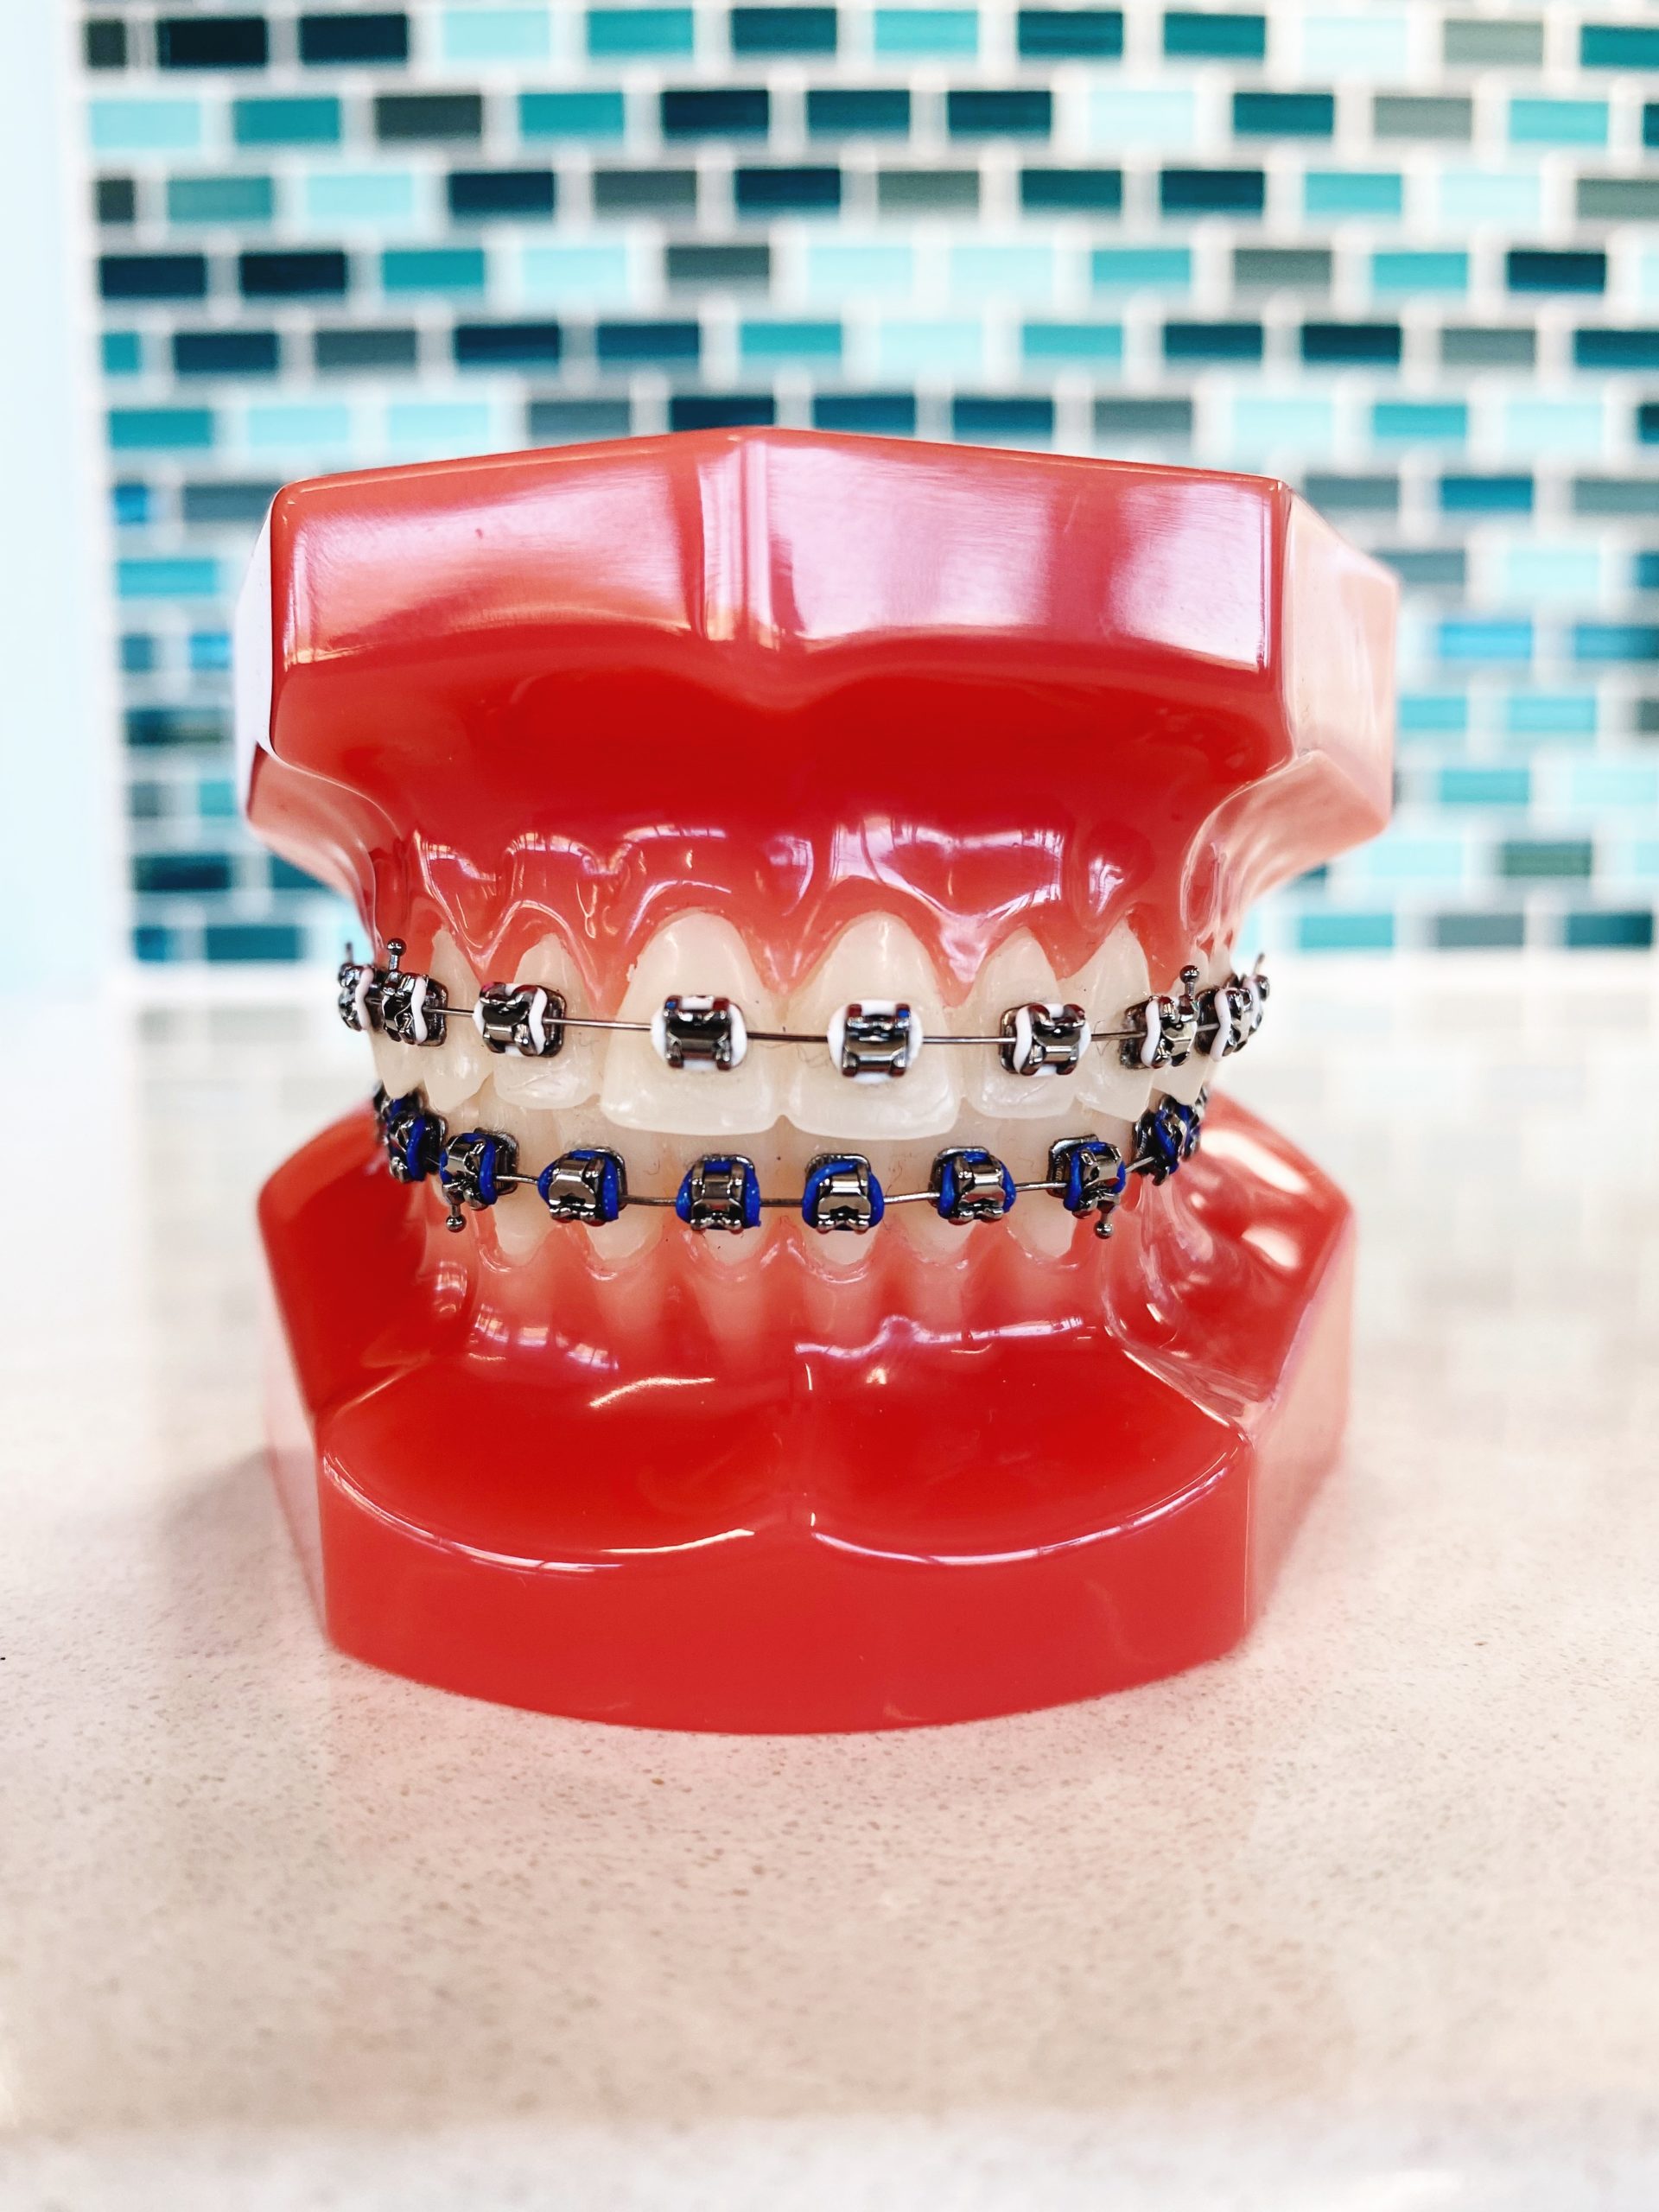 Blue and white color braces ruber band on 3d teeth